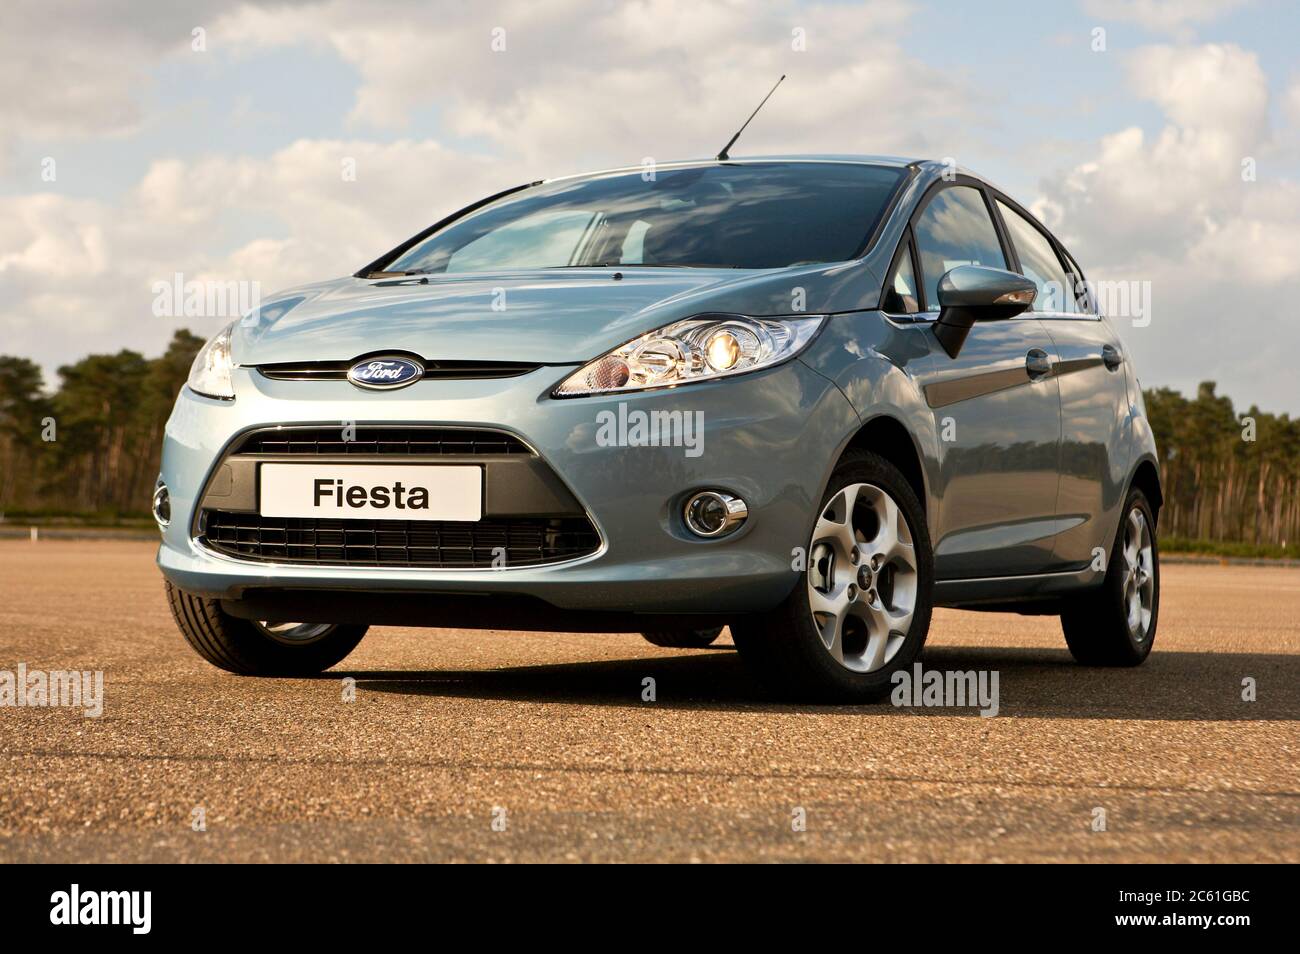 Cars. 2009 edition Ford Fiesta four door hatchback Stock Photo